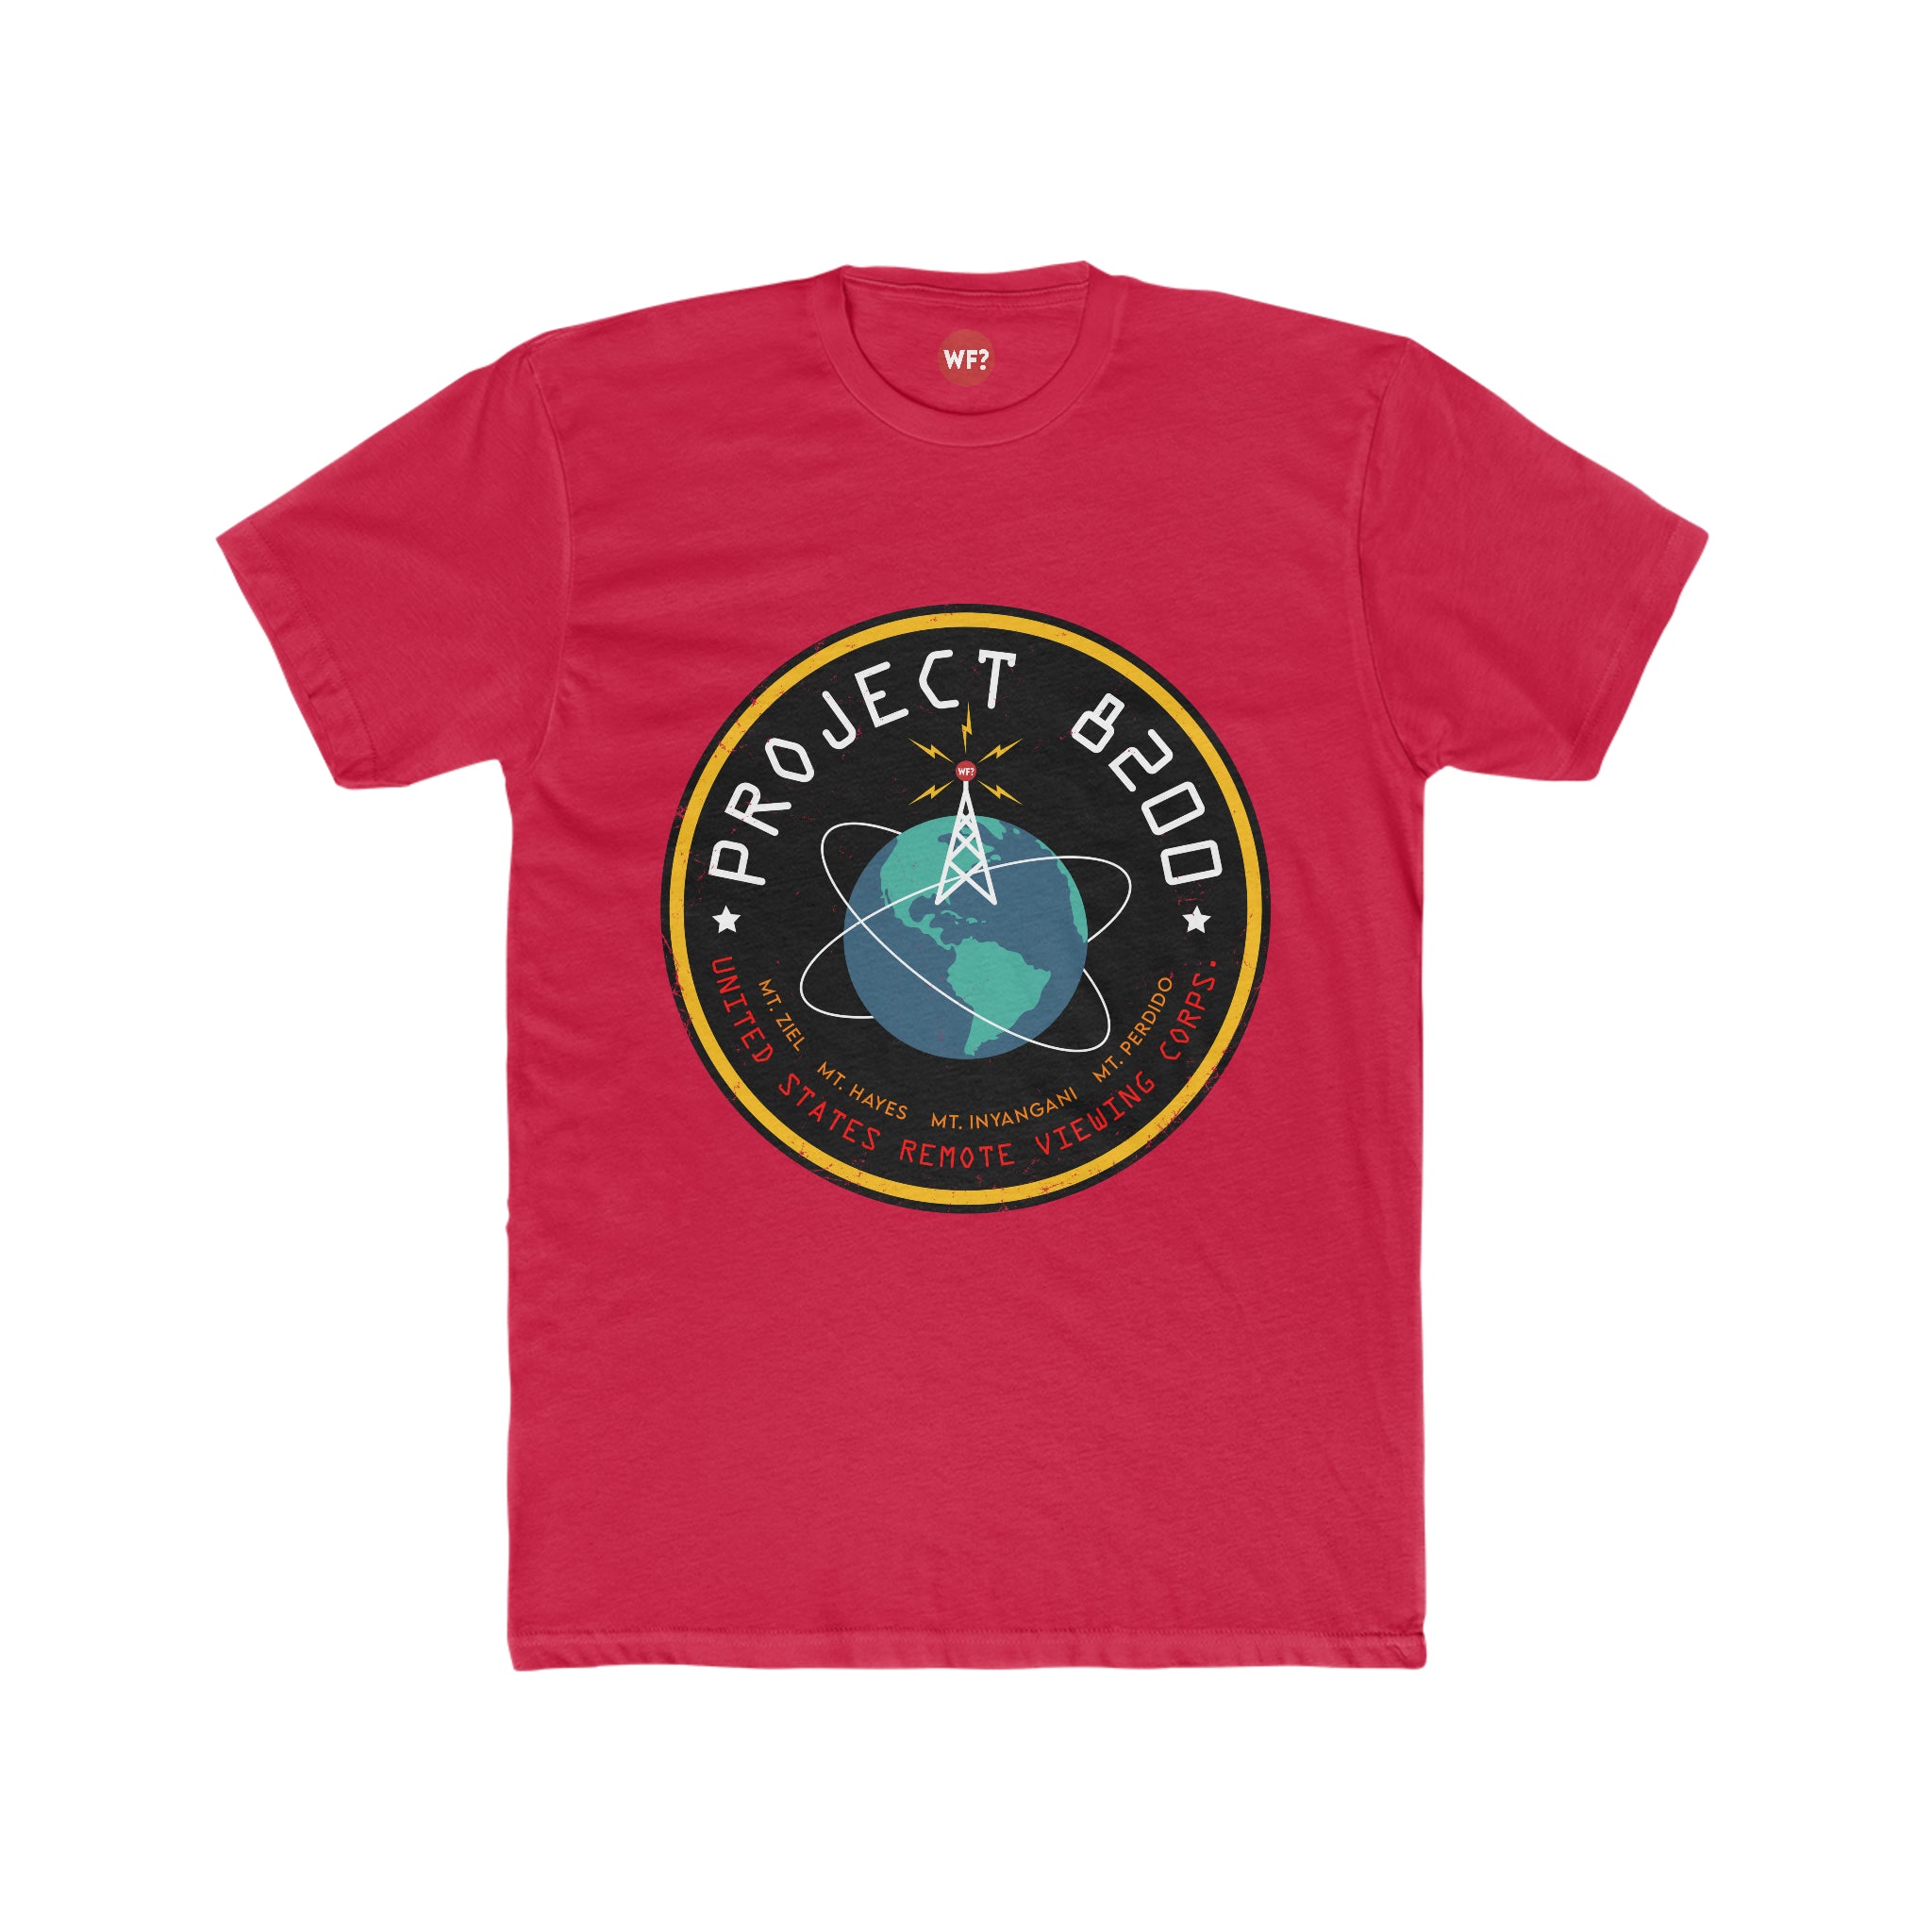 Buy solid-red 01/04 Project 8200 Limited T-Shirt